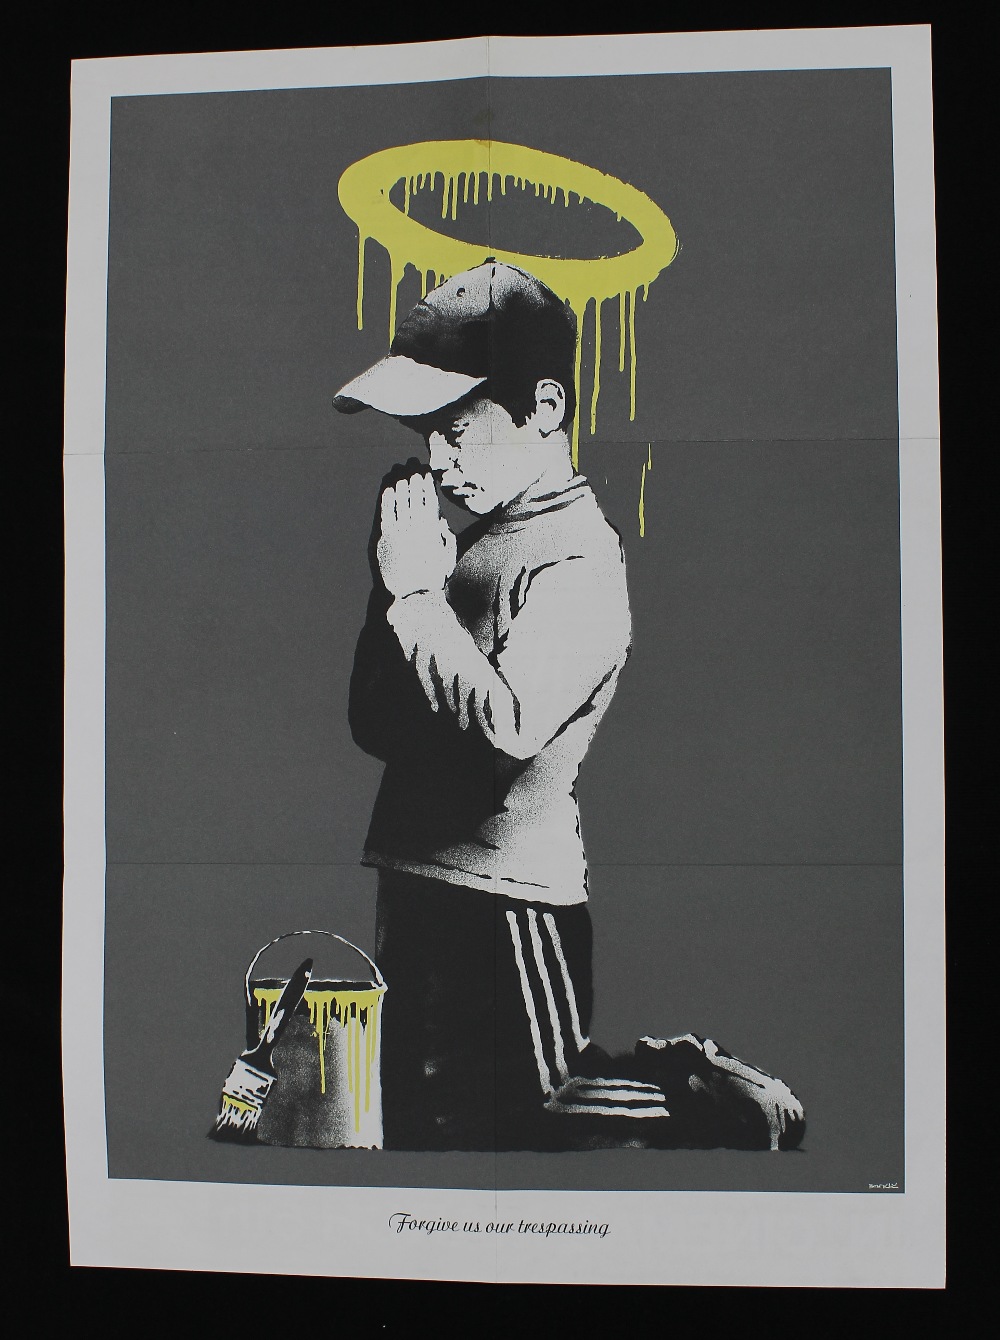 Banksy (British b. 1974) - 'Forgive Us Our Trespassing, 2010', offset coloured lithograph, a two-